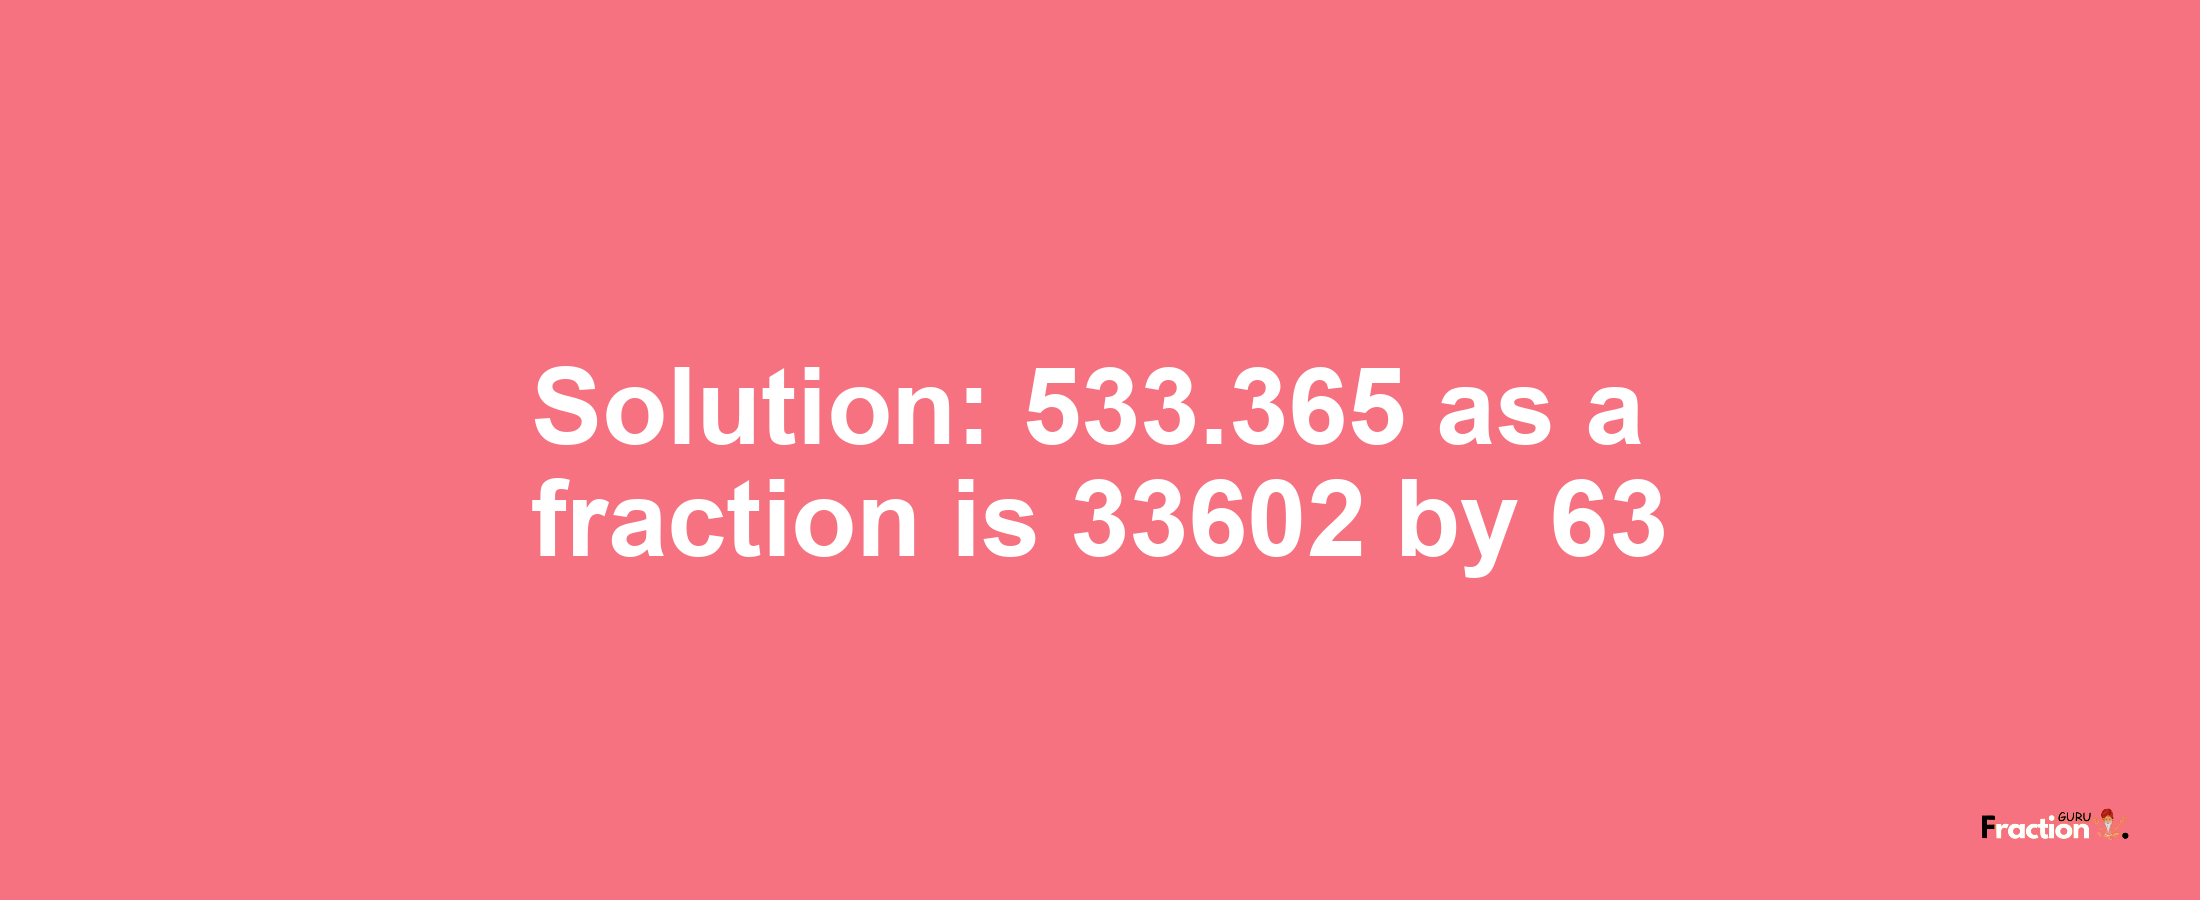 Solution:533.365 as a fraction is 33602/63